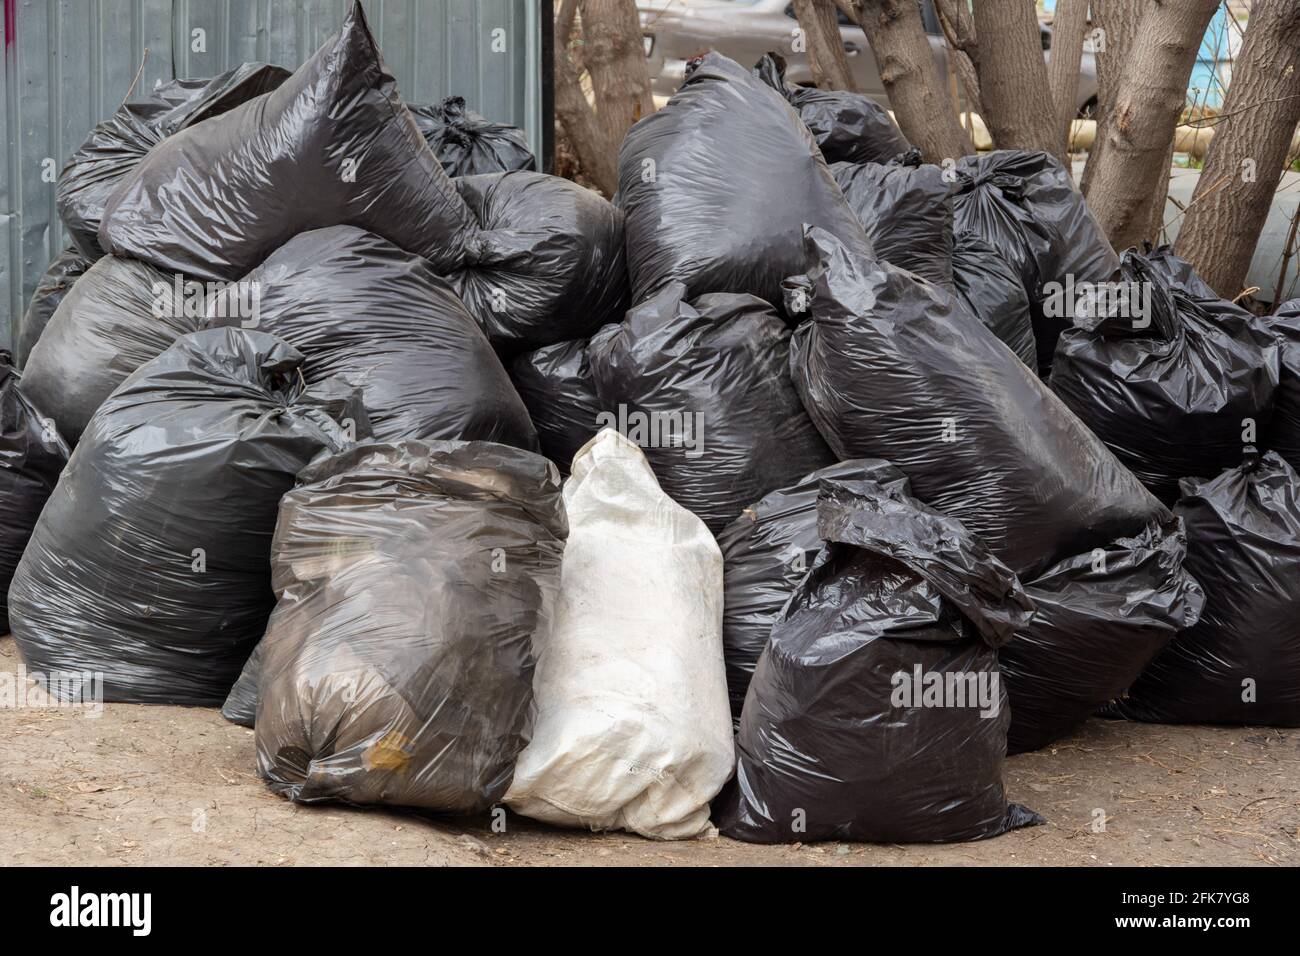 https://c8.alamy.com/comp/2FK7YG8/a-large-pile-of-black-garbage-bags-garbage-removal-on-the-city-streets-seasonal-cleaning-of-city-streets-cleaning-service-2FK7YG8.jpg